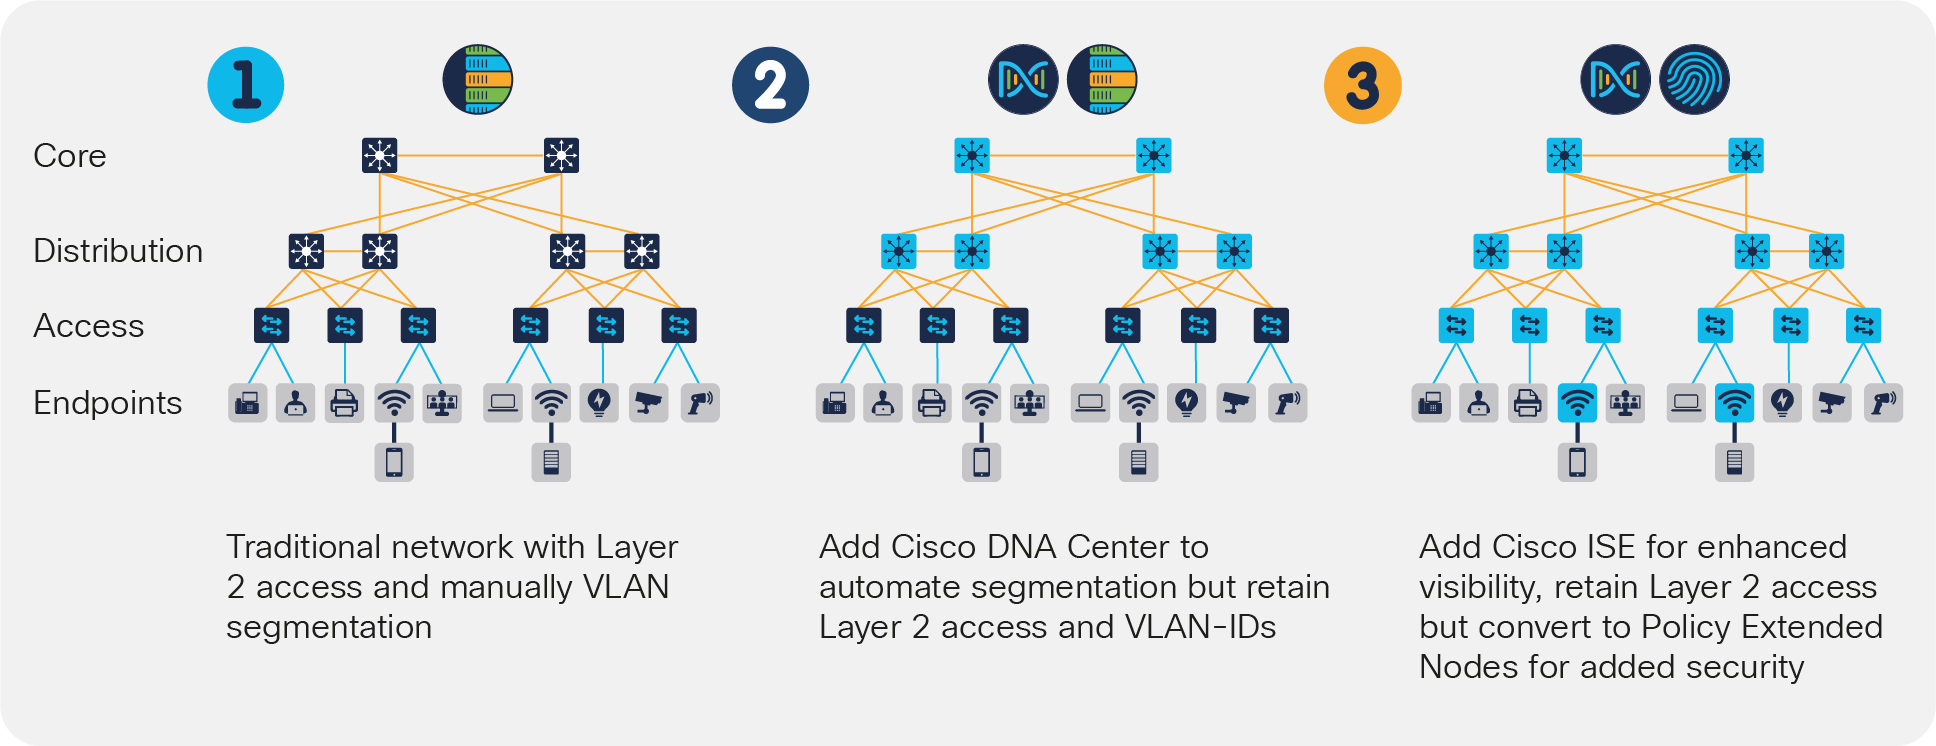 Steps in migration of a traditional network to full SD-Access